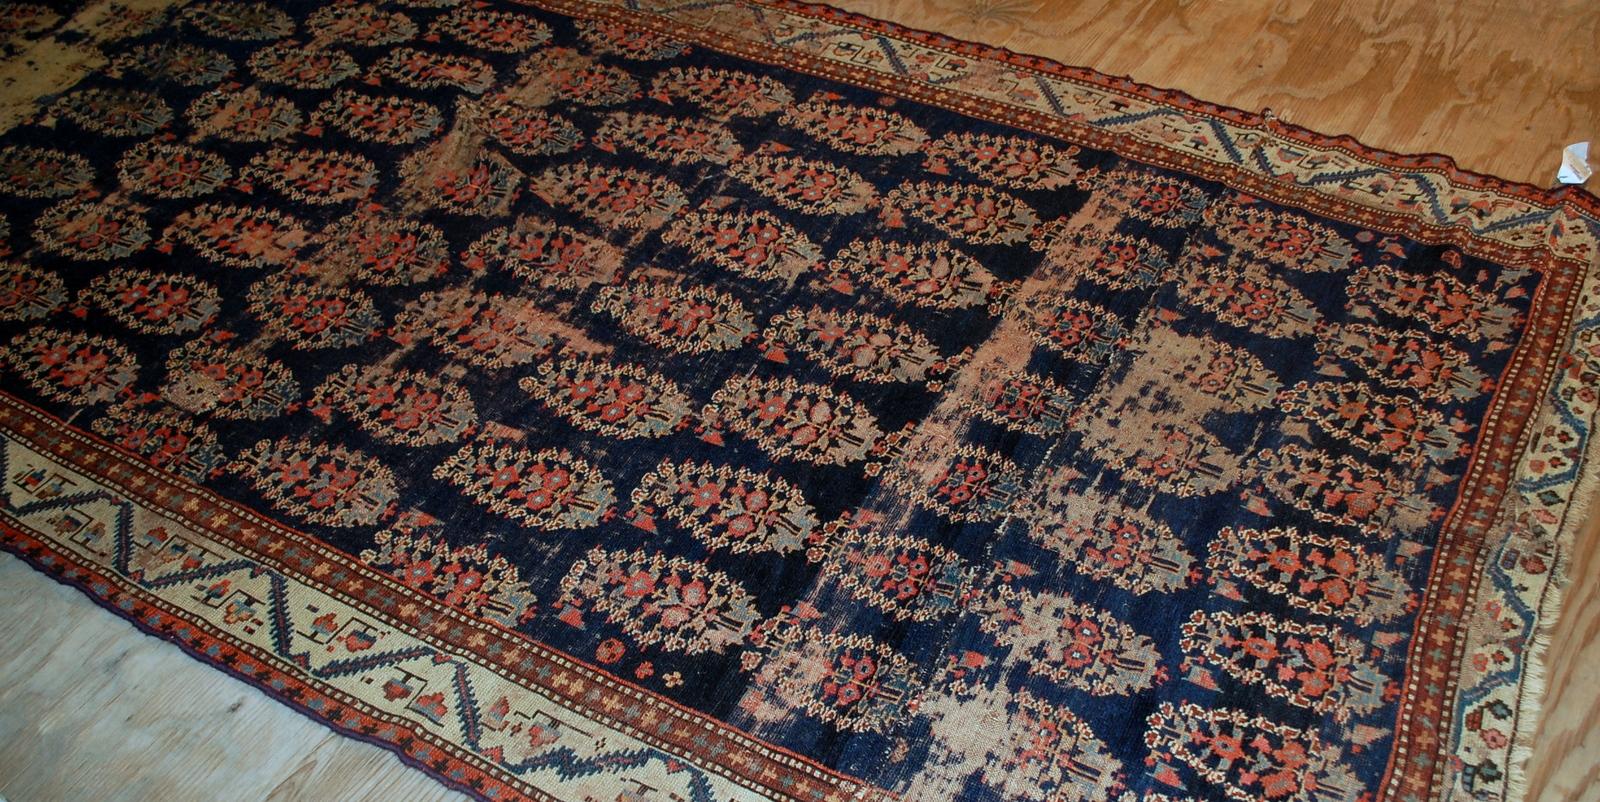 Handmade antique Northwest rug in original condition. This runner is collectible, has been made in the beginning of 19th century

-Condition: distressed,

-Circa 1830s,

-Size: 5.2' x 10.7' (158cm x 326cm),

-Material: wool,

-Country of